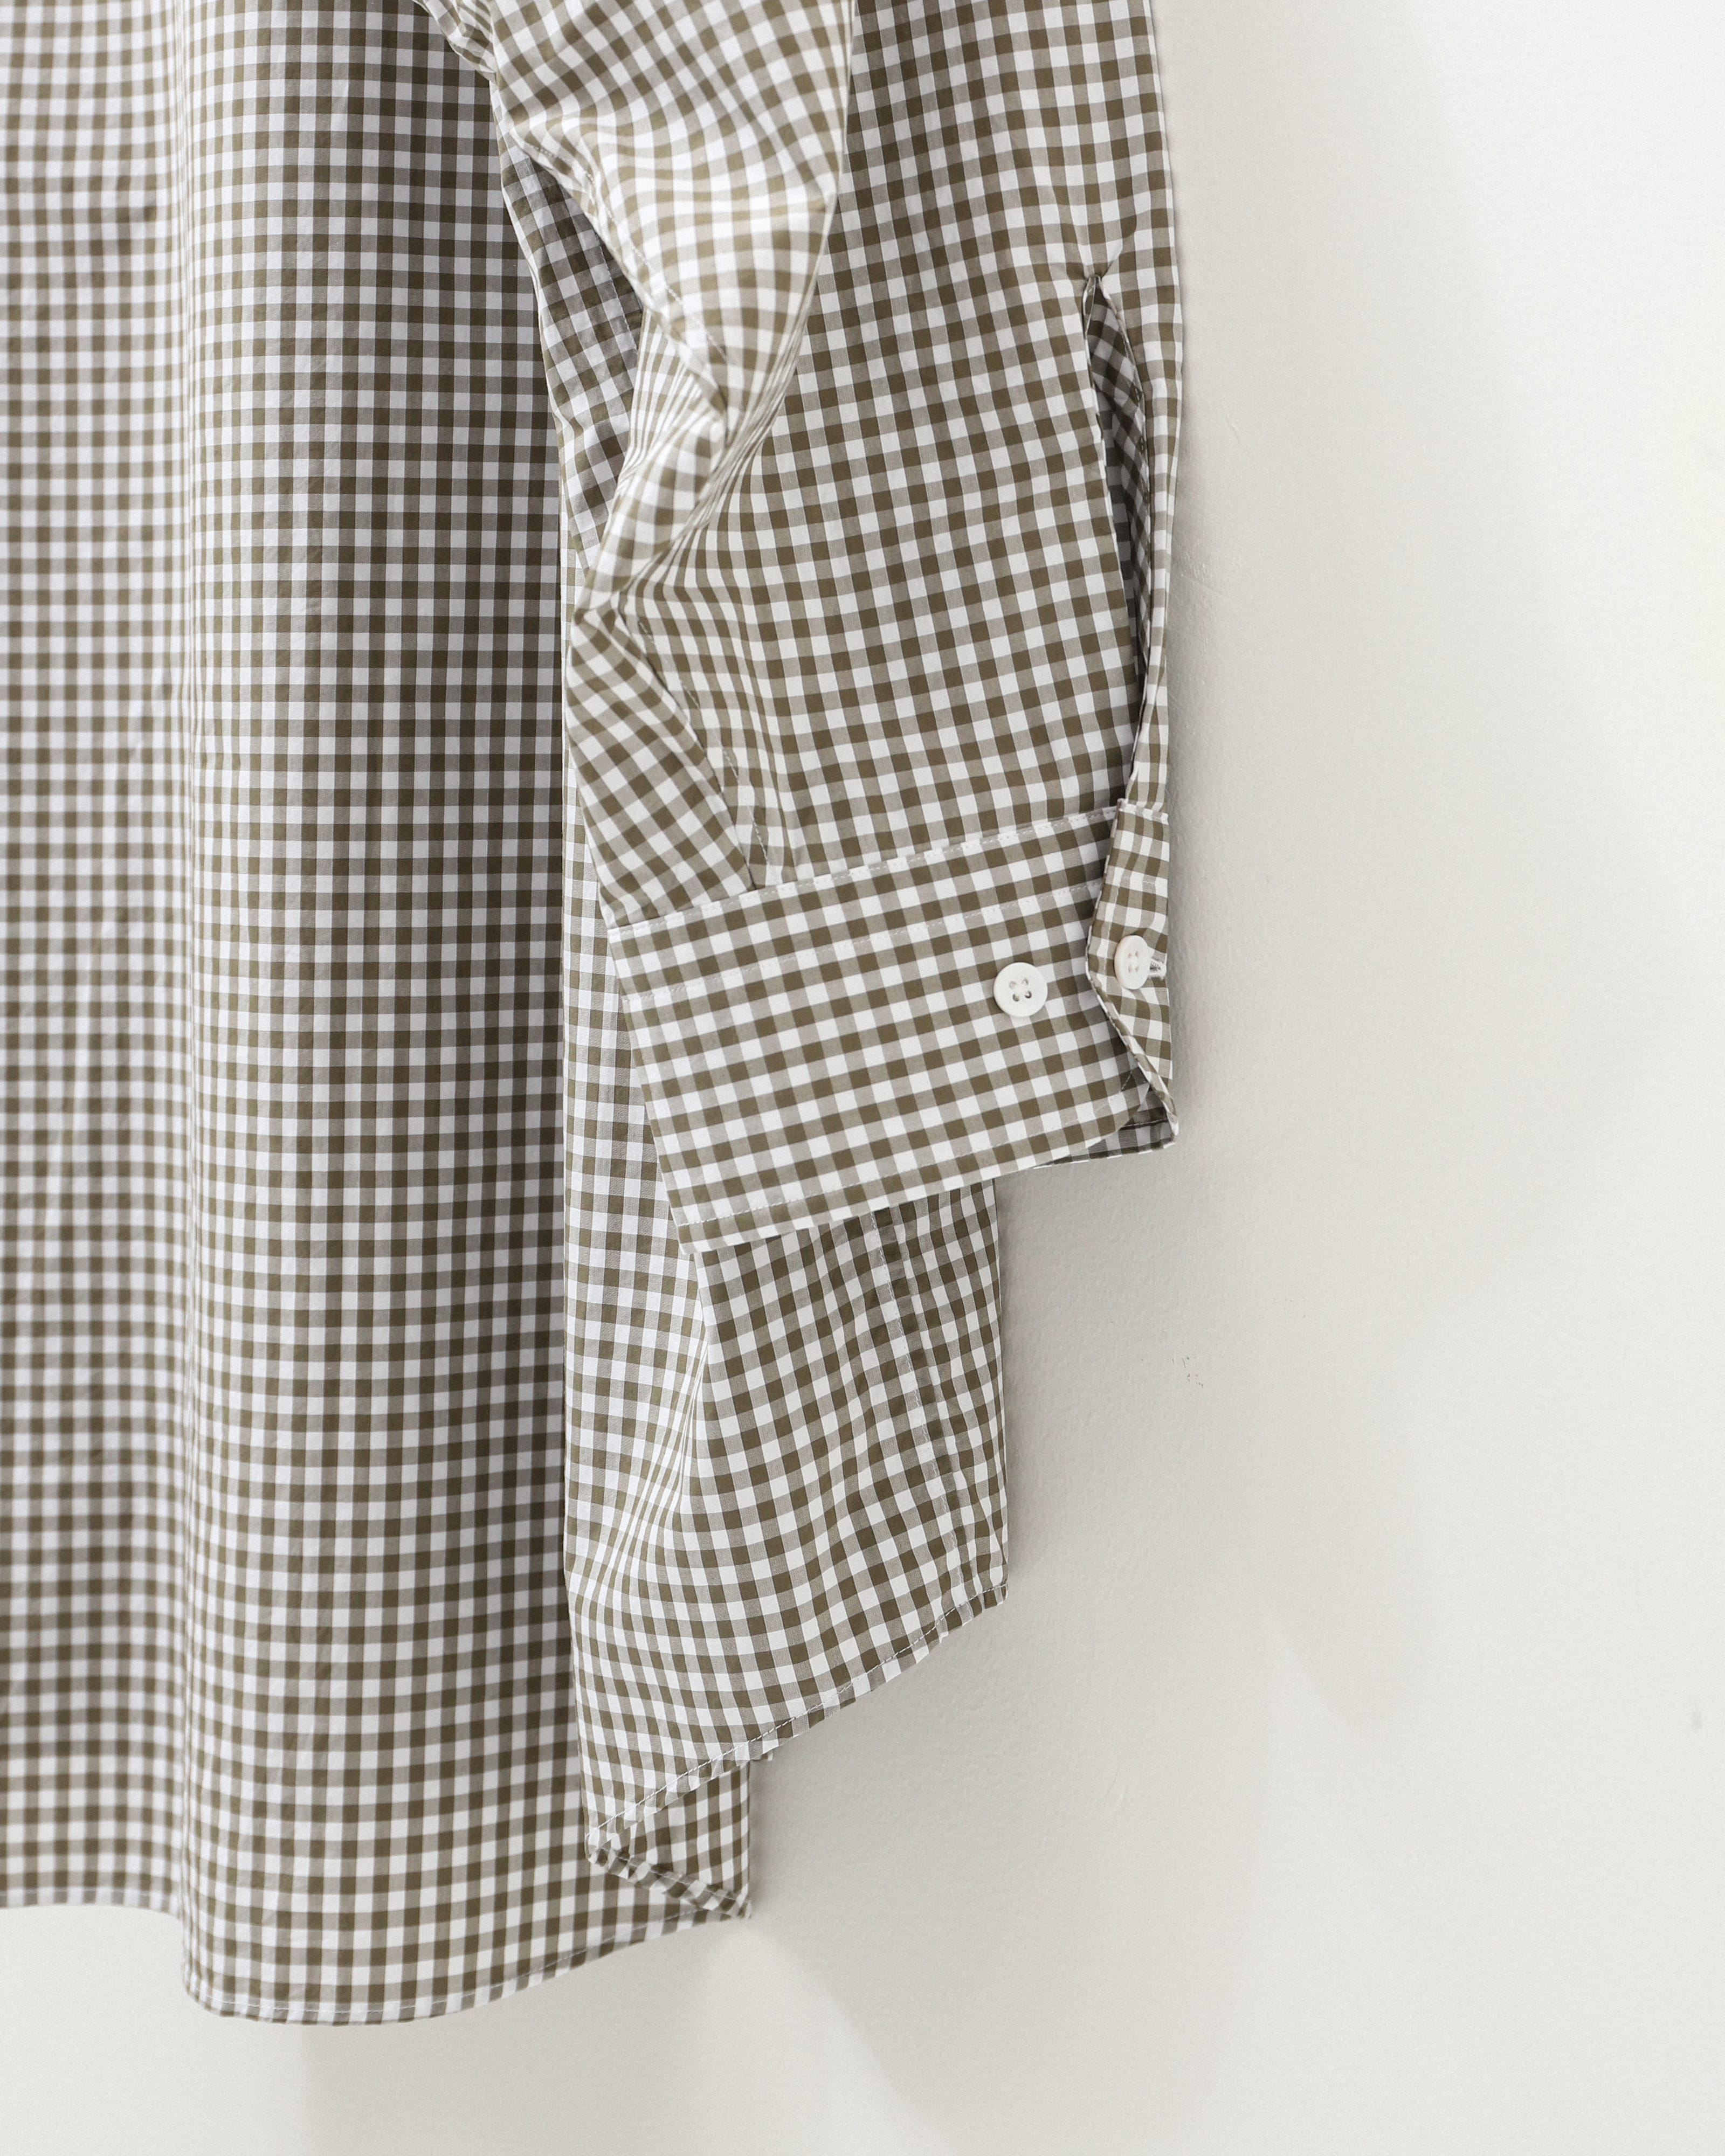 Suvin work shirt OLIVE GINGHAM – TIME AFTER TIME